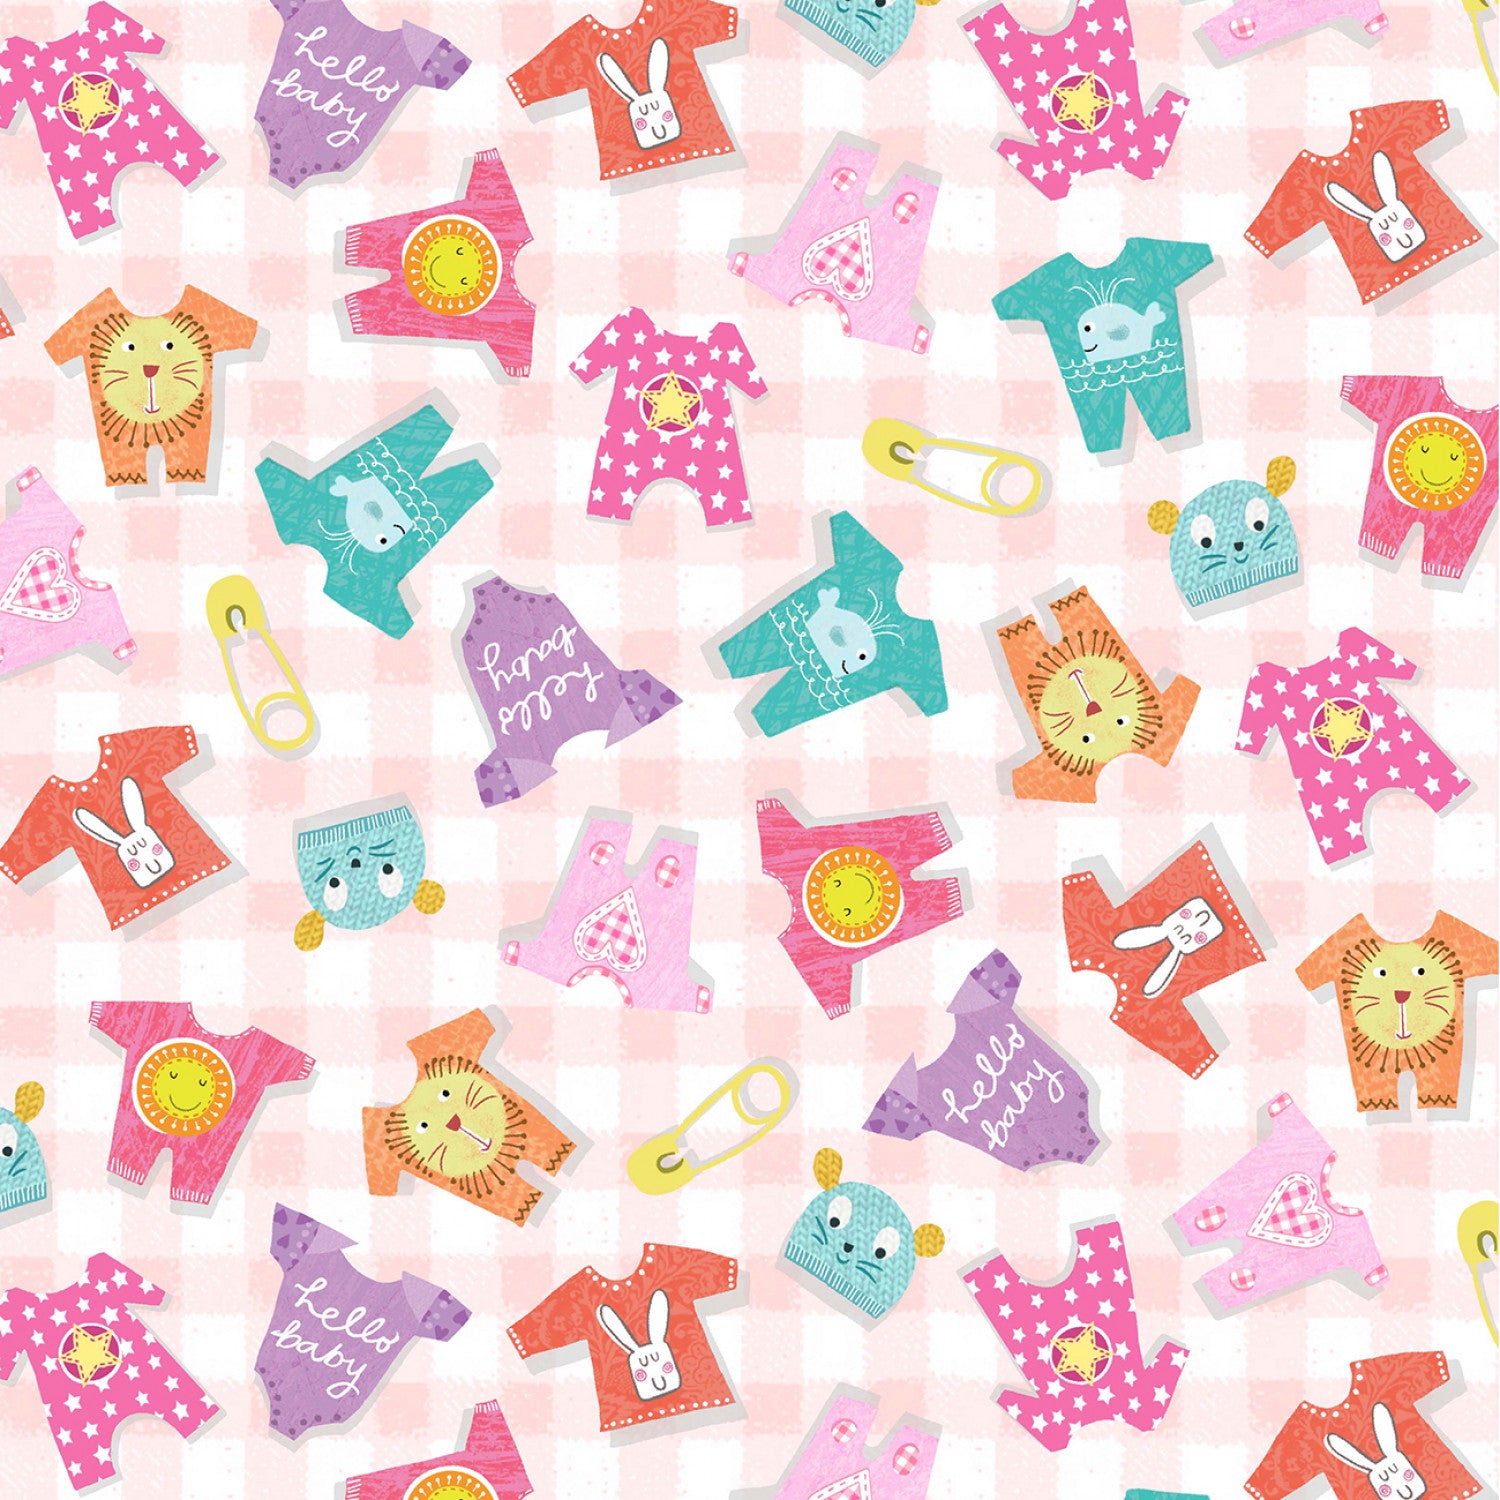 Baby Love - Pink Rompers by Tracy Cottingham for Michael Miller Fabrics